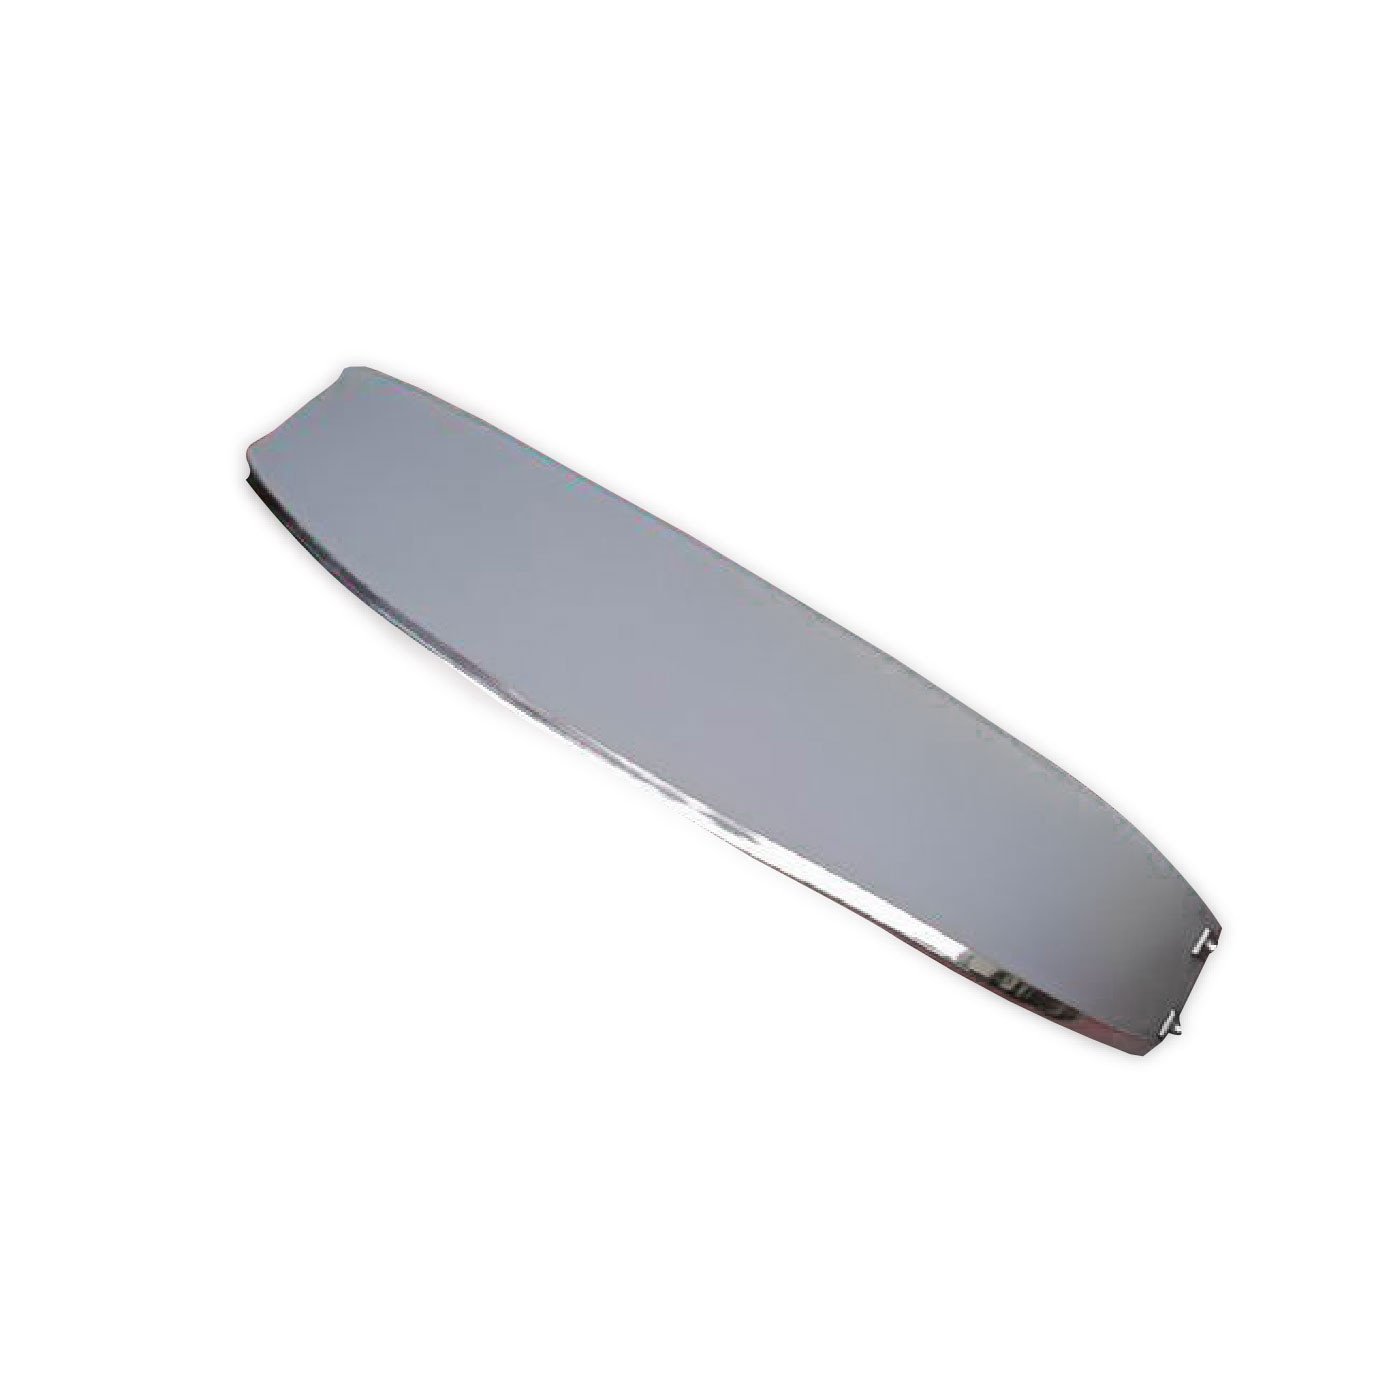 SOLID METAL SUNVISOR FOR TOYOTA CAMRY 2011-ON